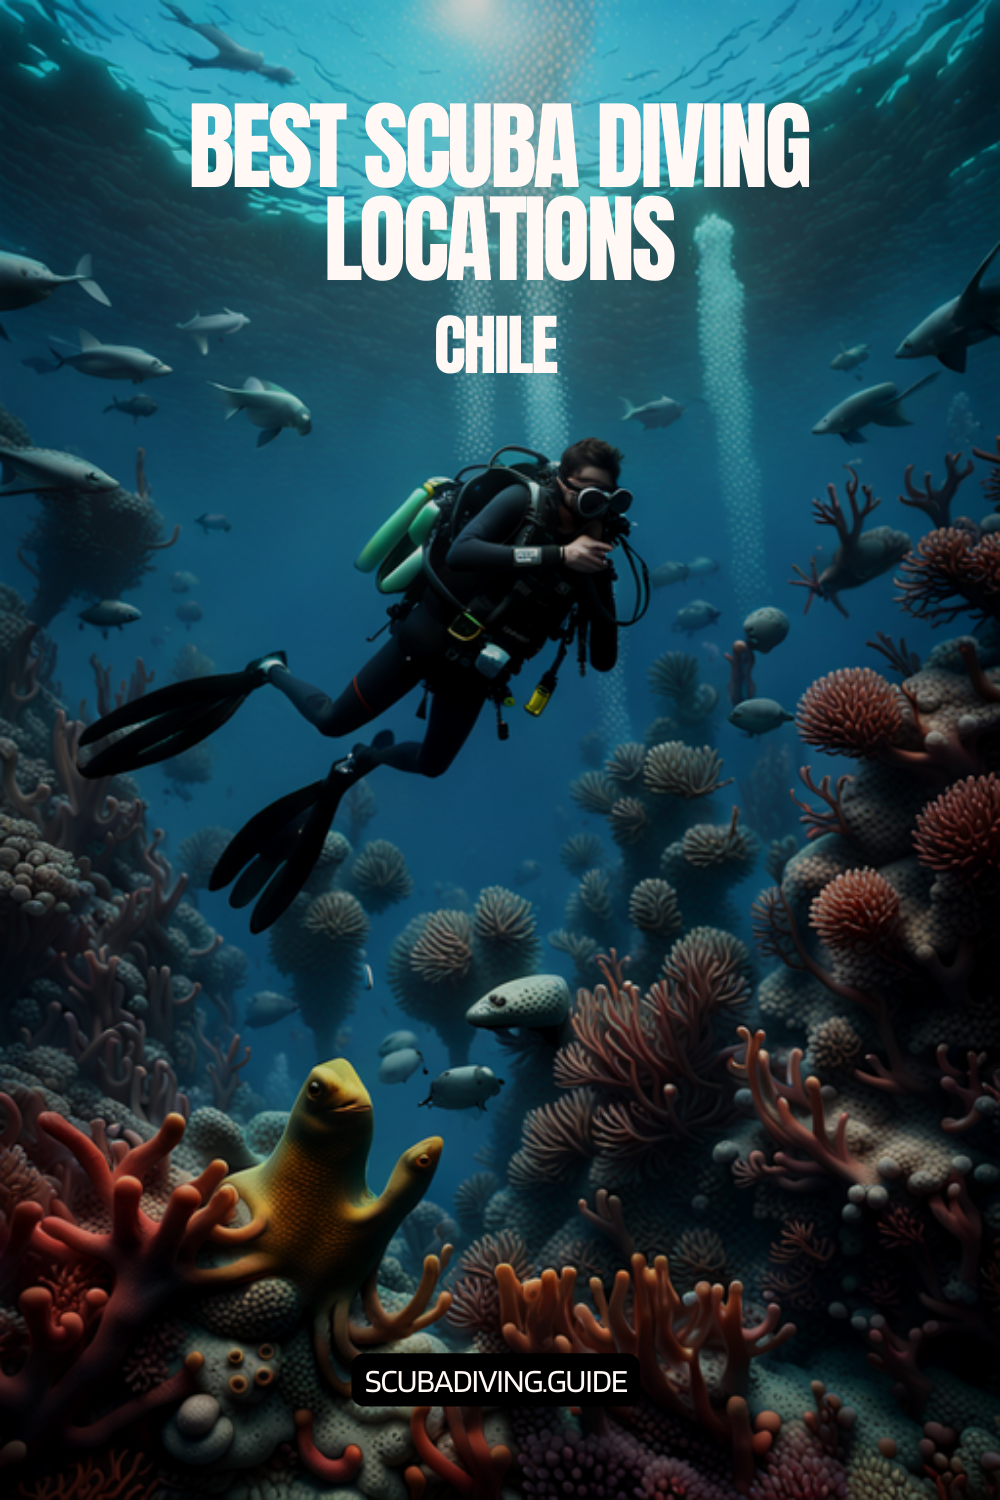 Scuba Diving Locations in Chile